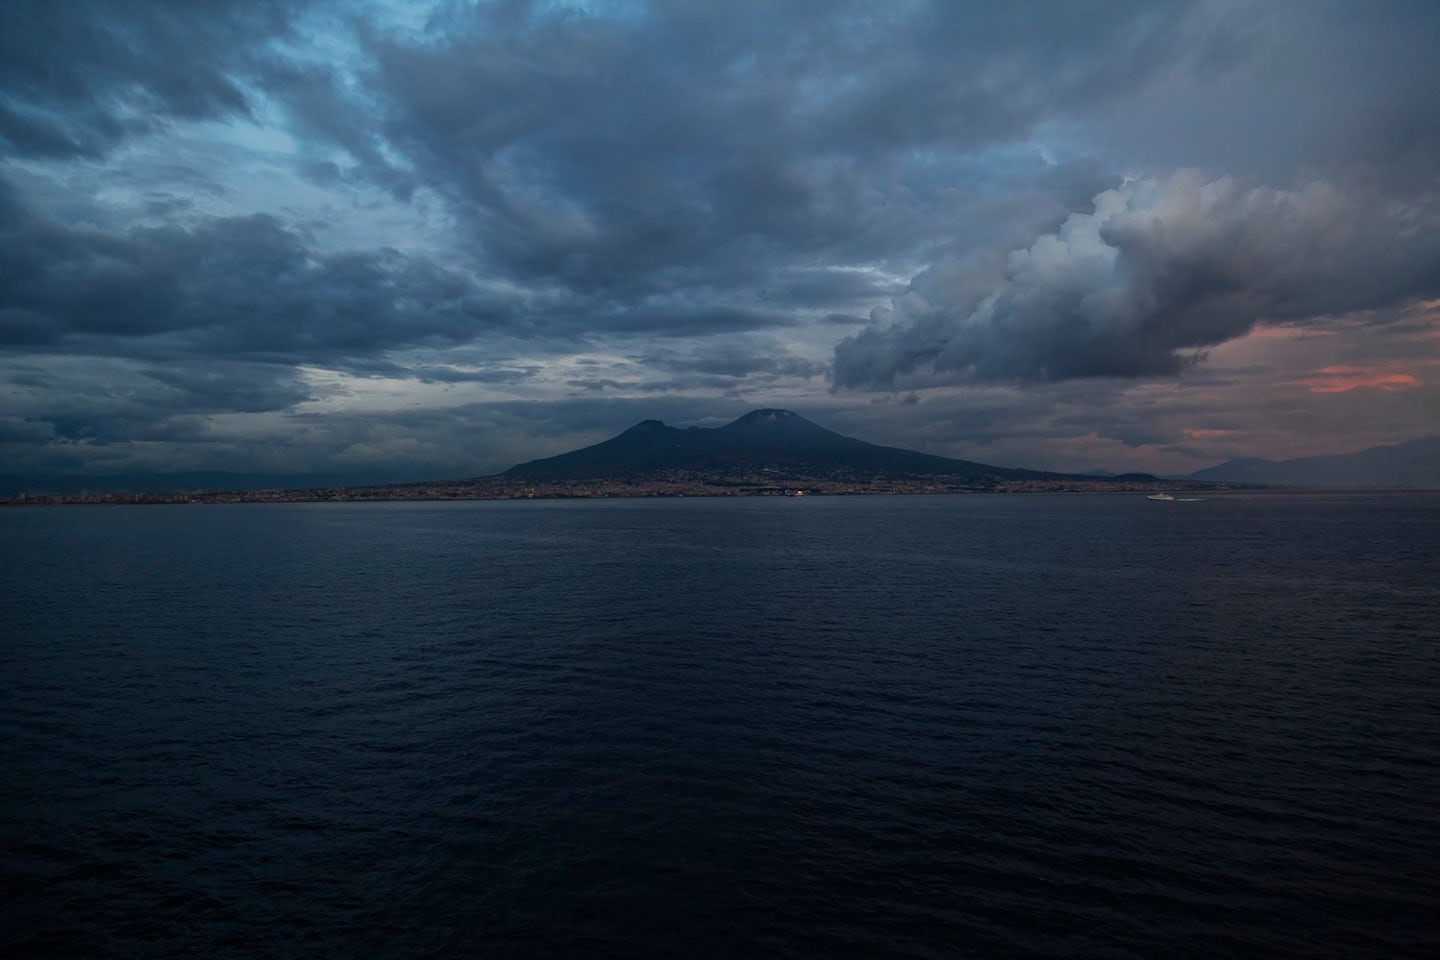 Vesuvius as seen from ship leaving Naples in the evening.